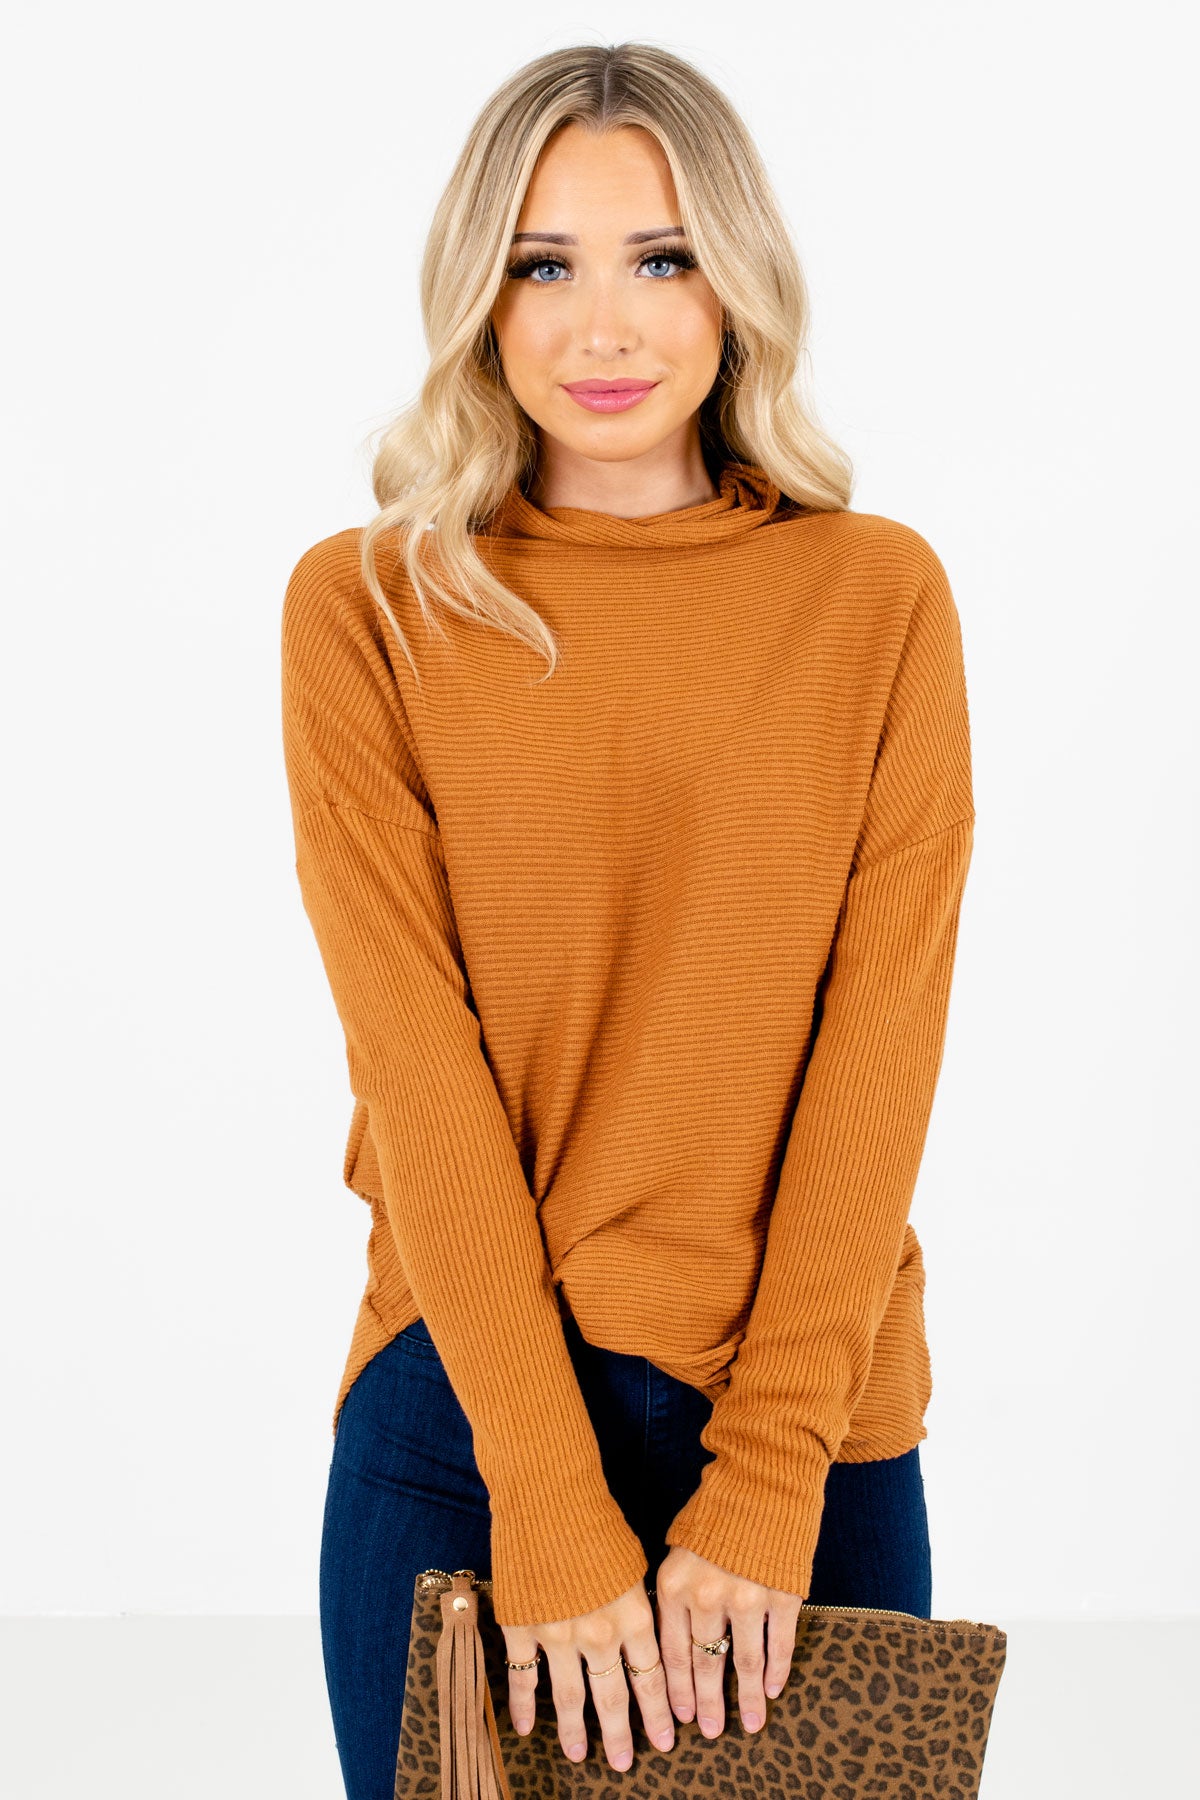 Tawny Orange Cute and Comfortable Boutique Sweaters for Women